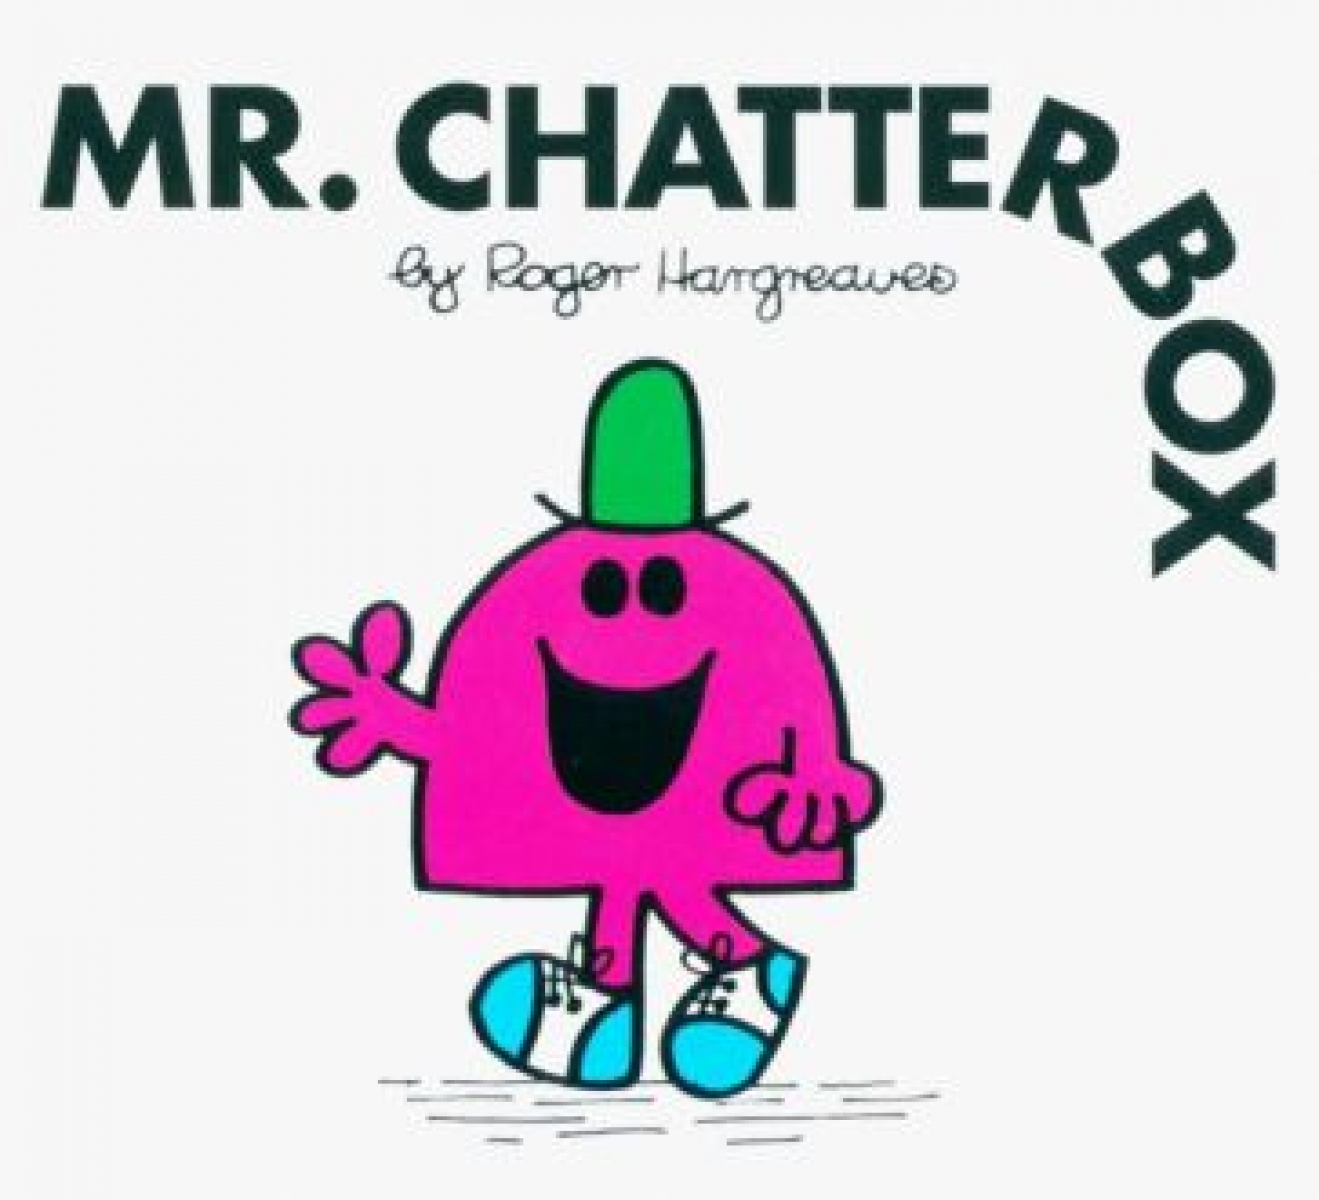 Hargreaves Roger Mr. Chatterbox 